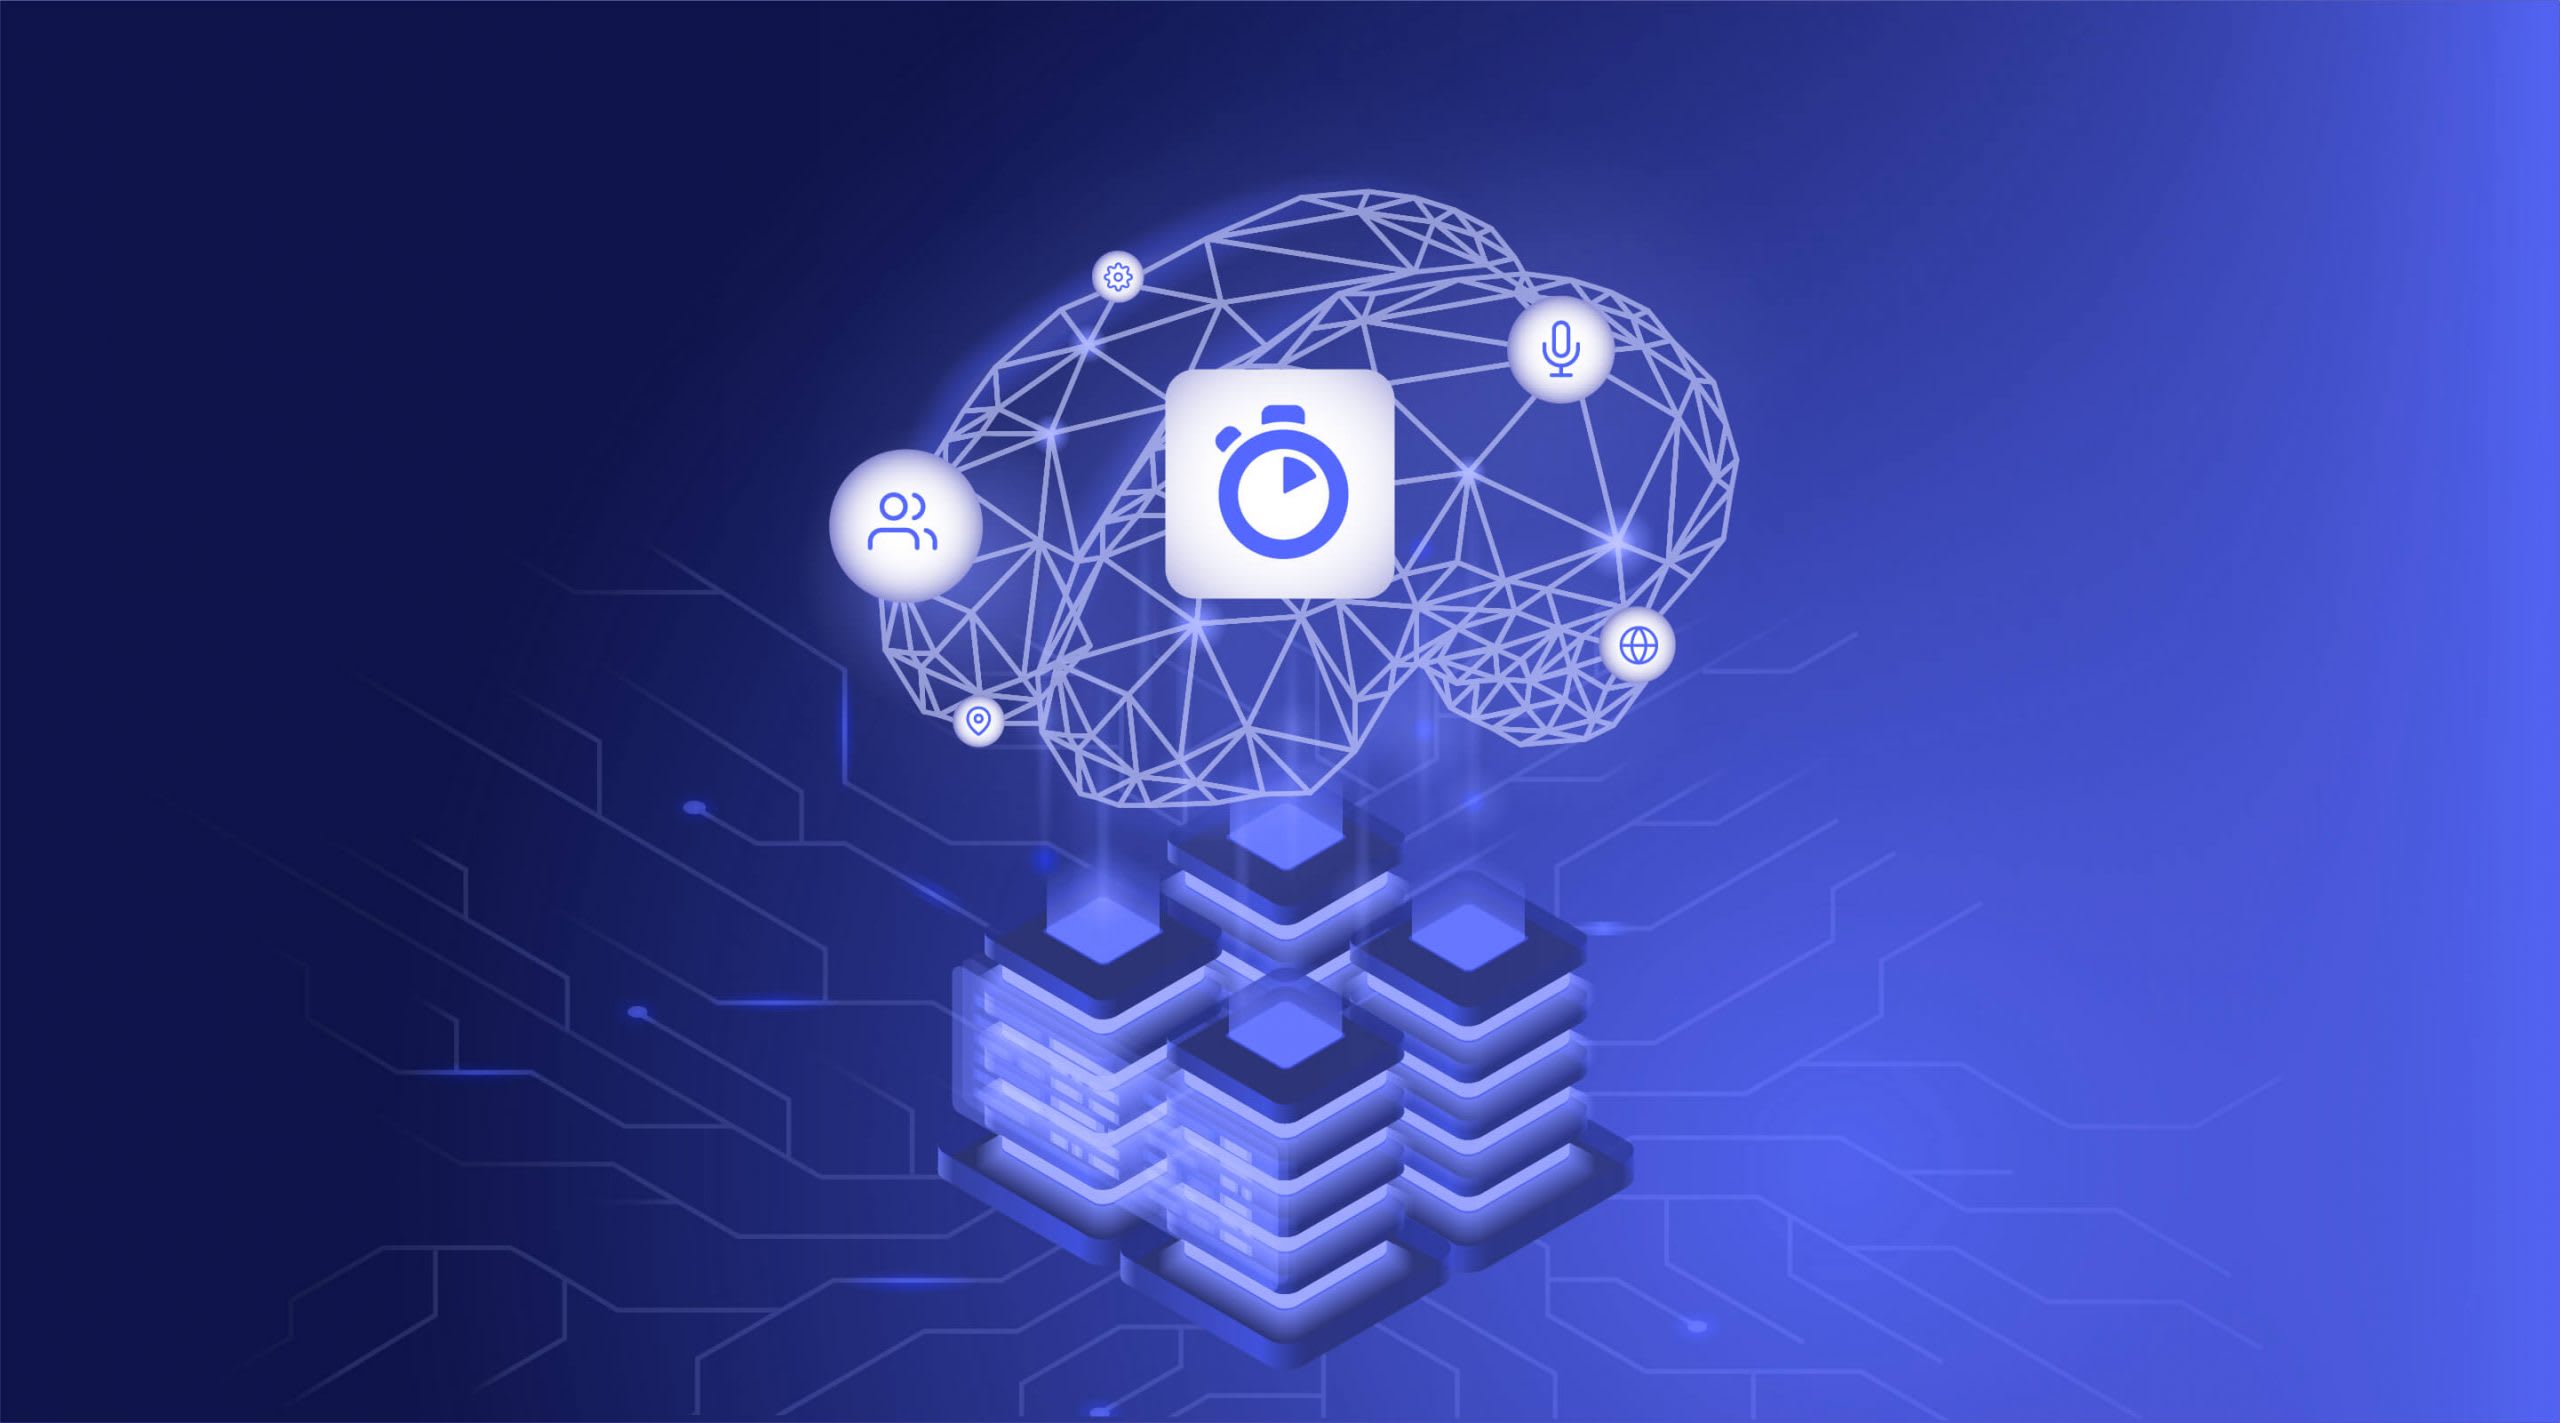 What is intelligent search and how does it work?, Algolia